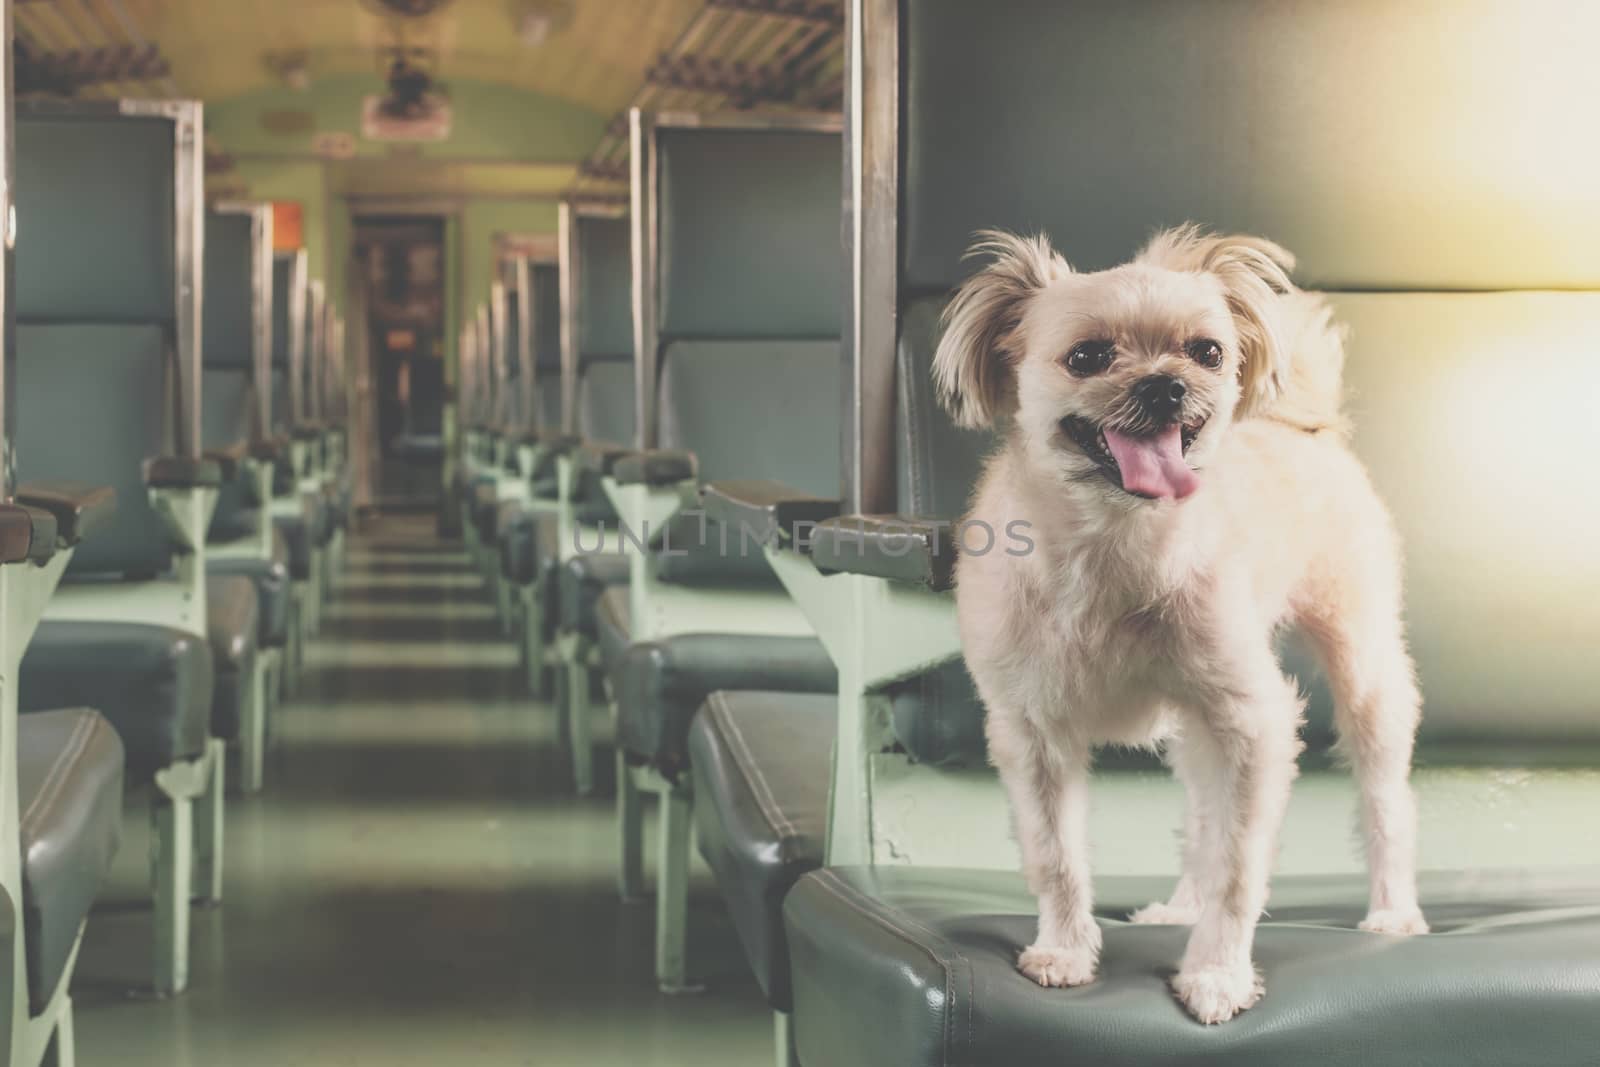 Dog so cute beige color mixed breed with Shih-Tzu, Pomeranian and Poodle on car seat inside a railway train cabin vintage style wait for vacation travel trip